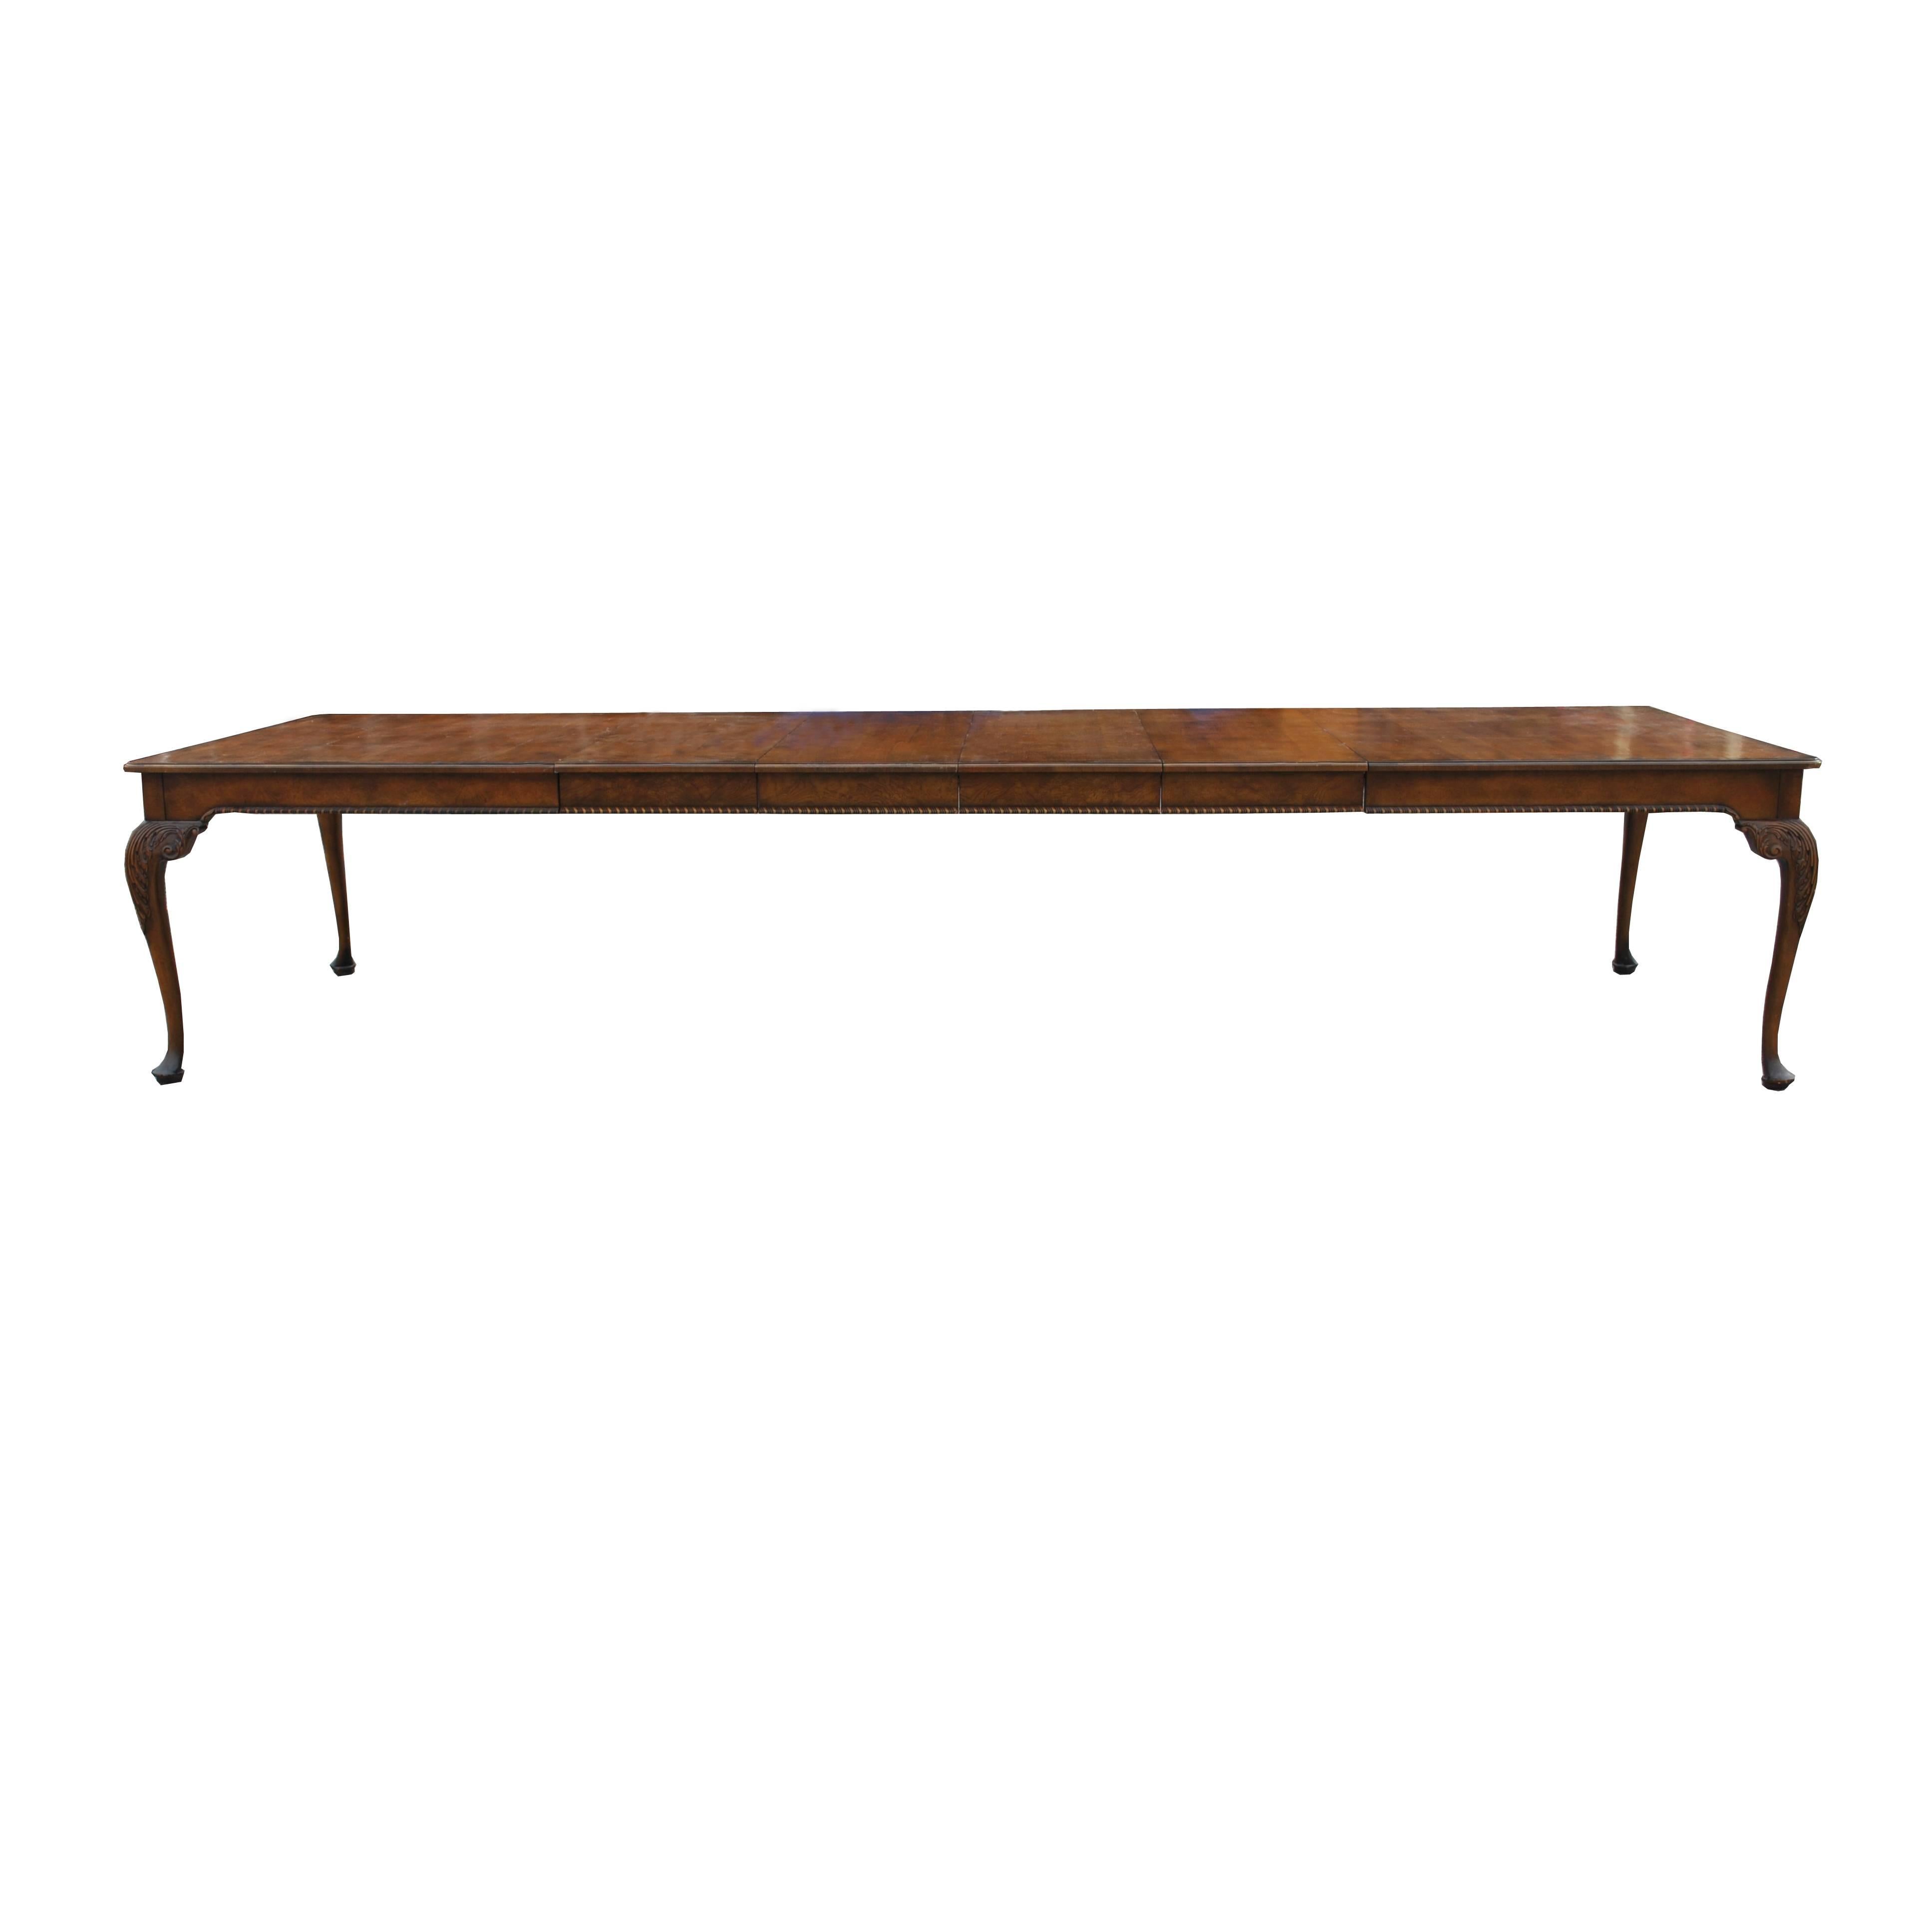 Queen Anne style 12ft dining conference table
From the baker furniture stately homes collection

Stunning walnut dining table, rounded
rectangular hand planed top with molded and crossbanded borders with ornate cabriole legs.
Four leaves